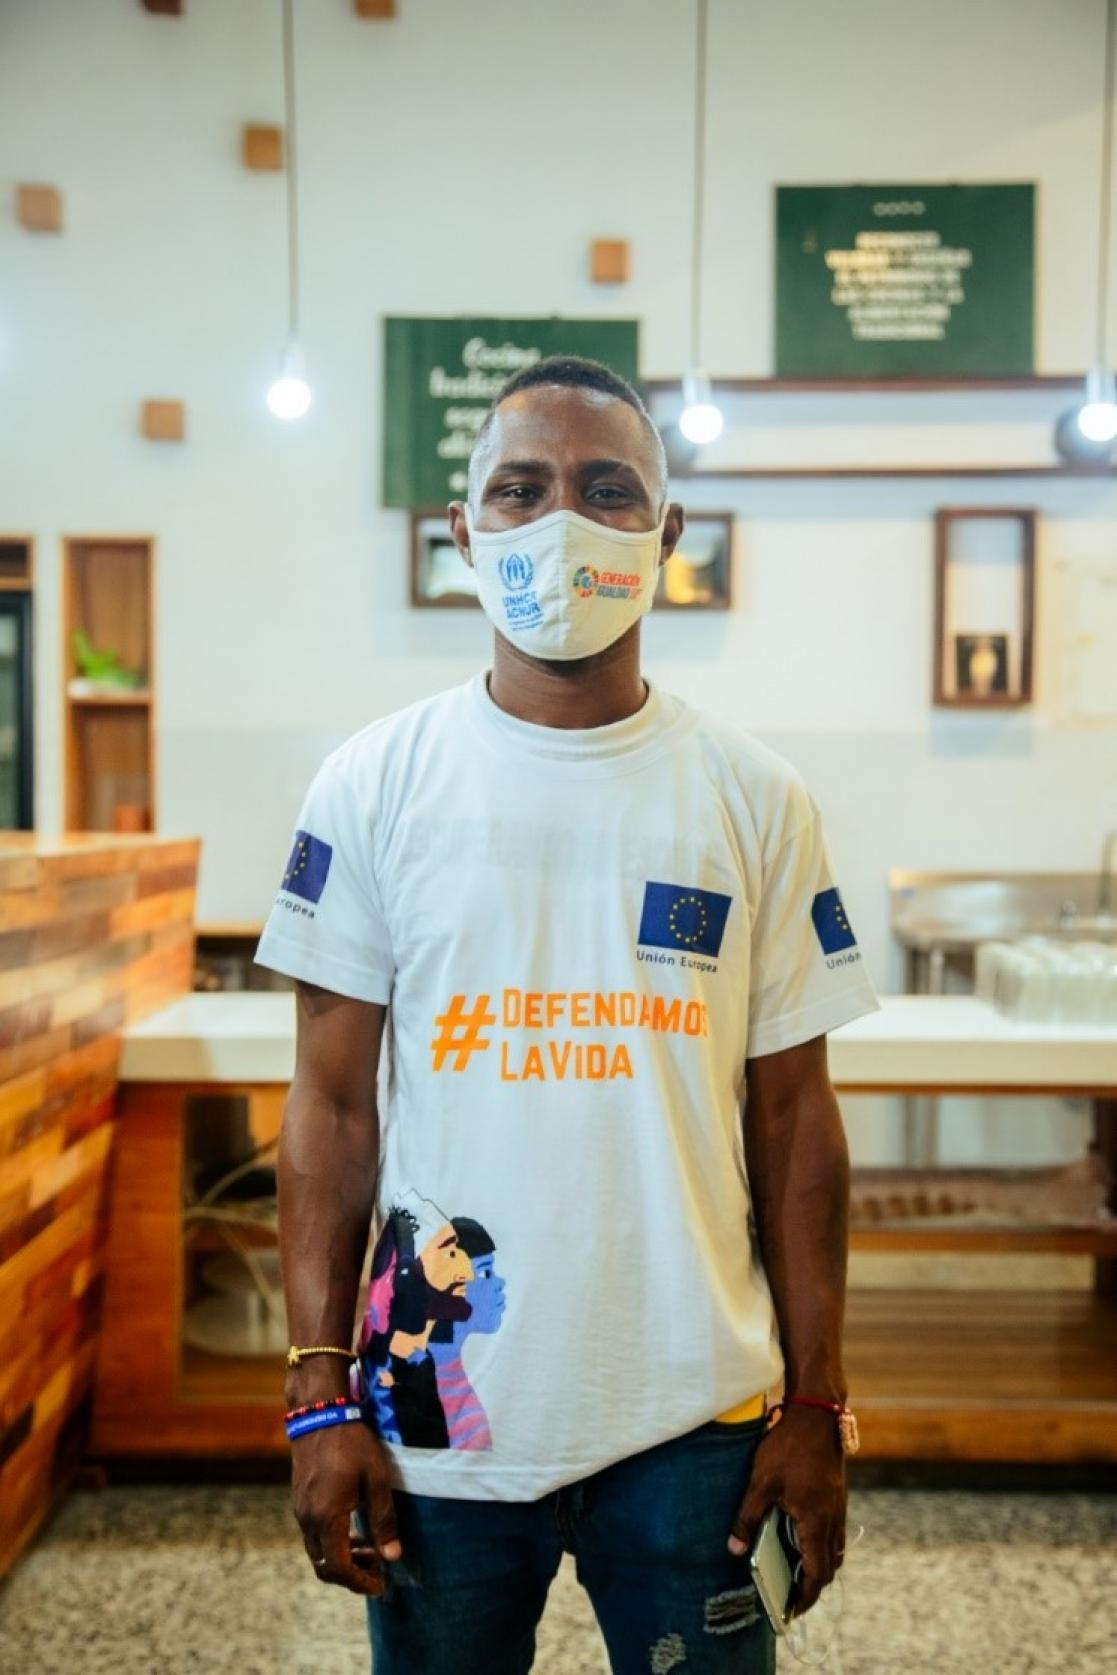 Man wearing a face mask and a t-shirt about human rights